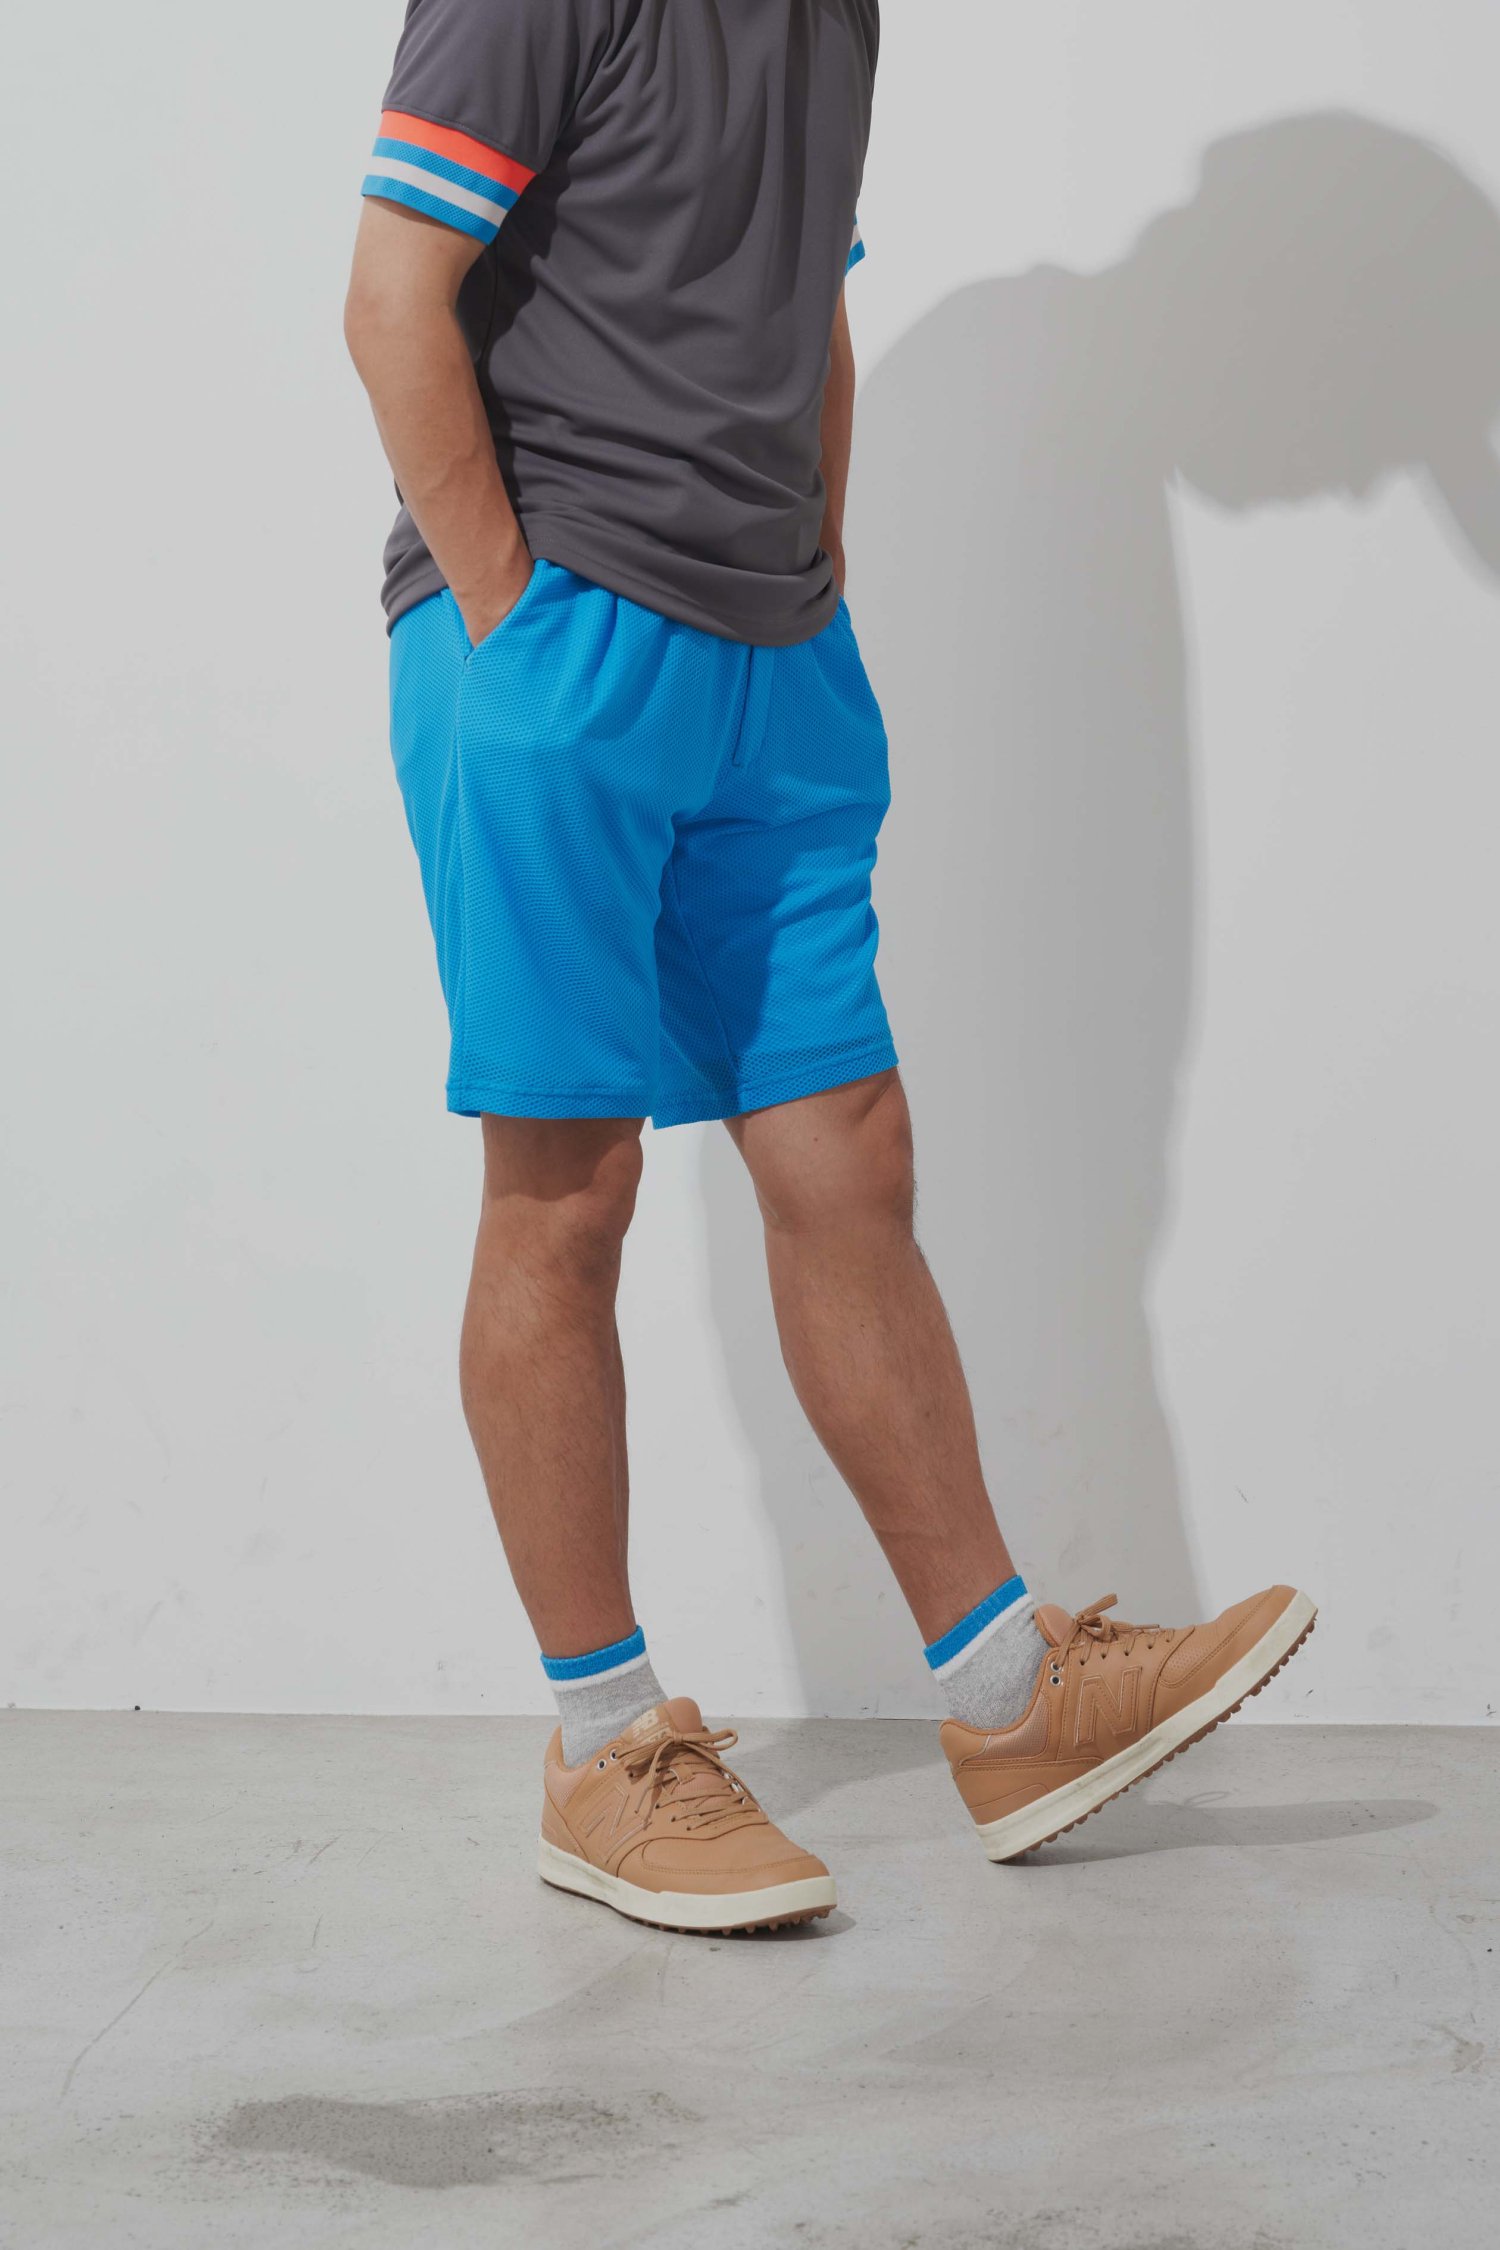 <img class='new_mark_img1' src='https://img.shop-pro.jp/img/new/icons5.gif' style='border:none;display:inline;margin:0px;padding:0px;width:auto;' />＜NEW!!＞ Coolness Mesh shorts pants / MAN